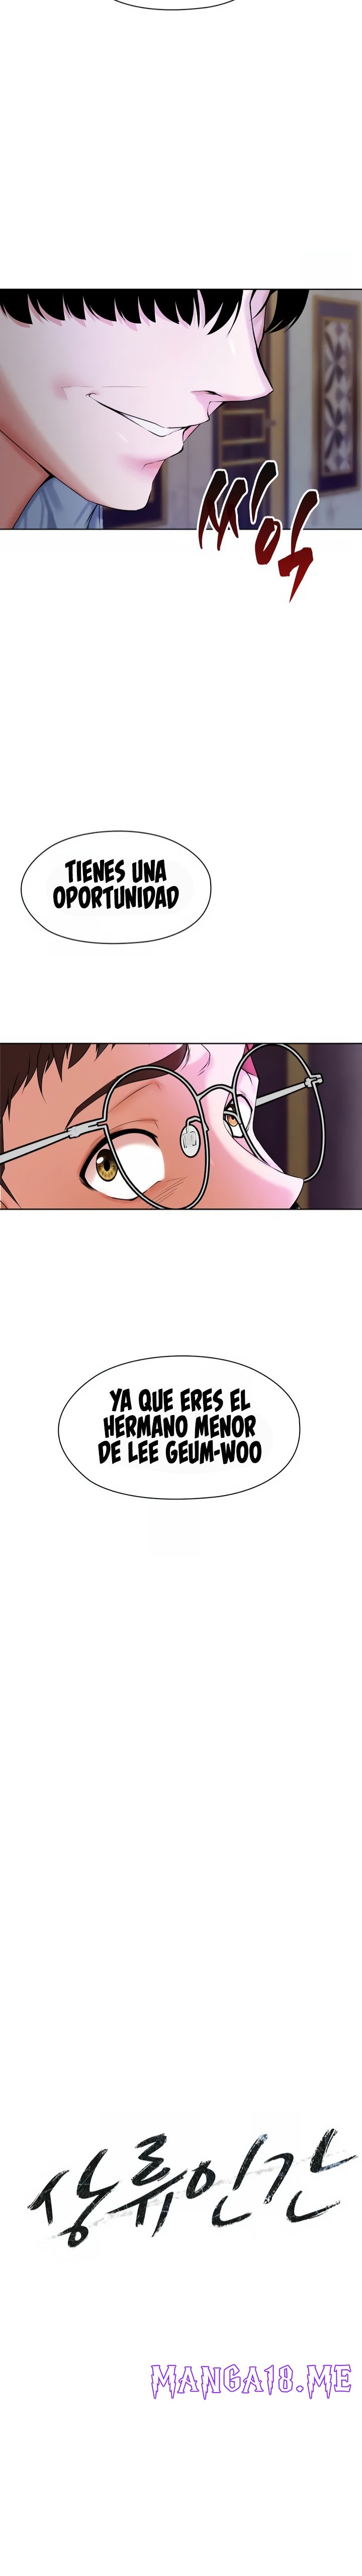 Clase A Raw - Chapter 1 Page 8